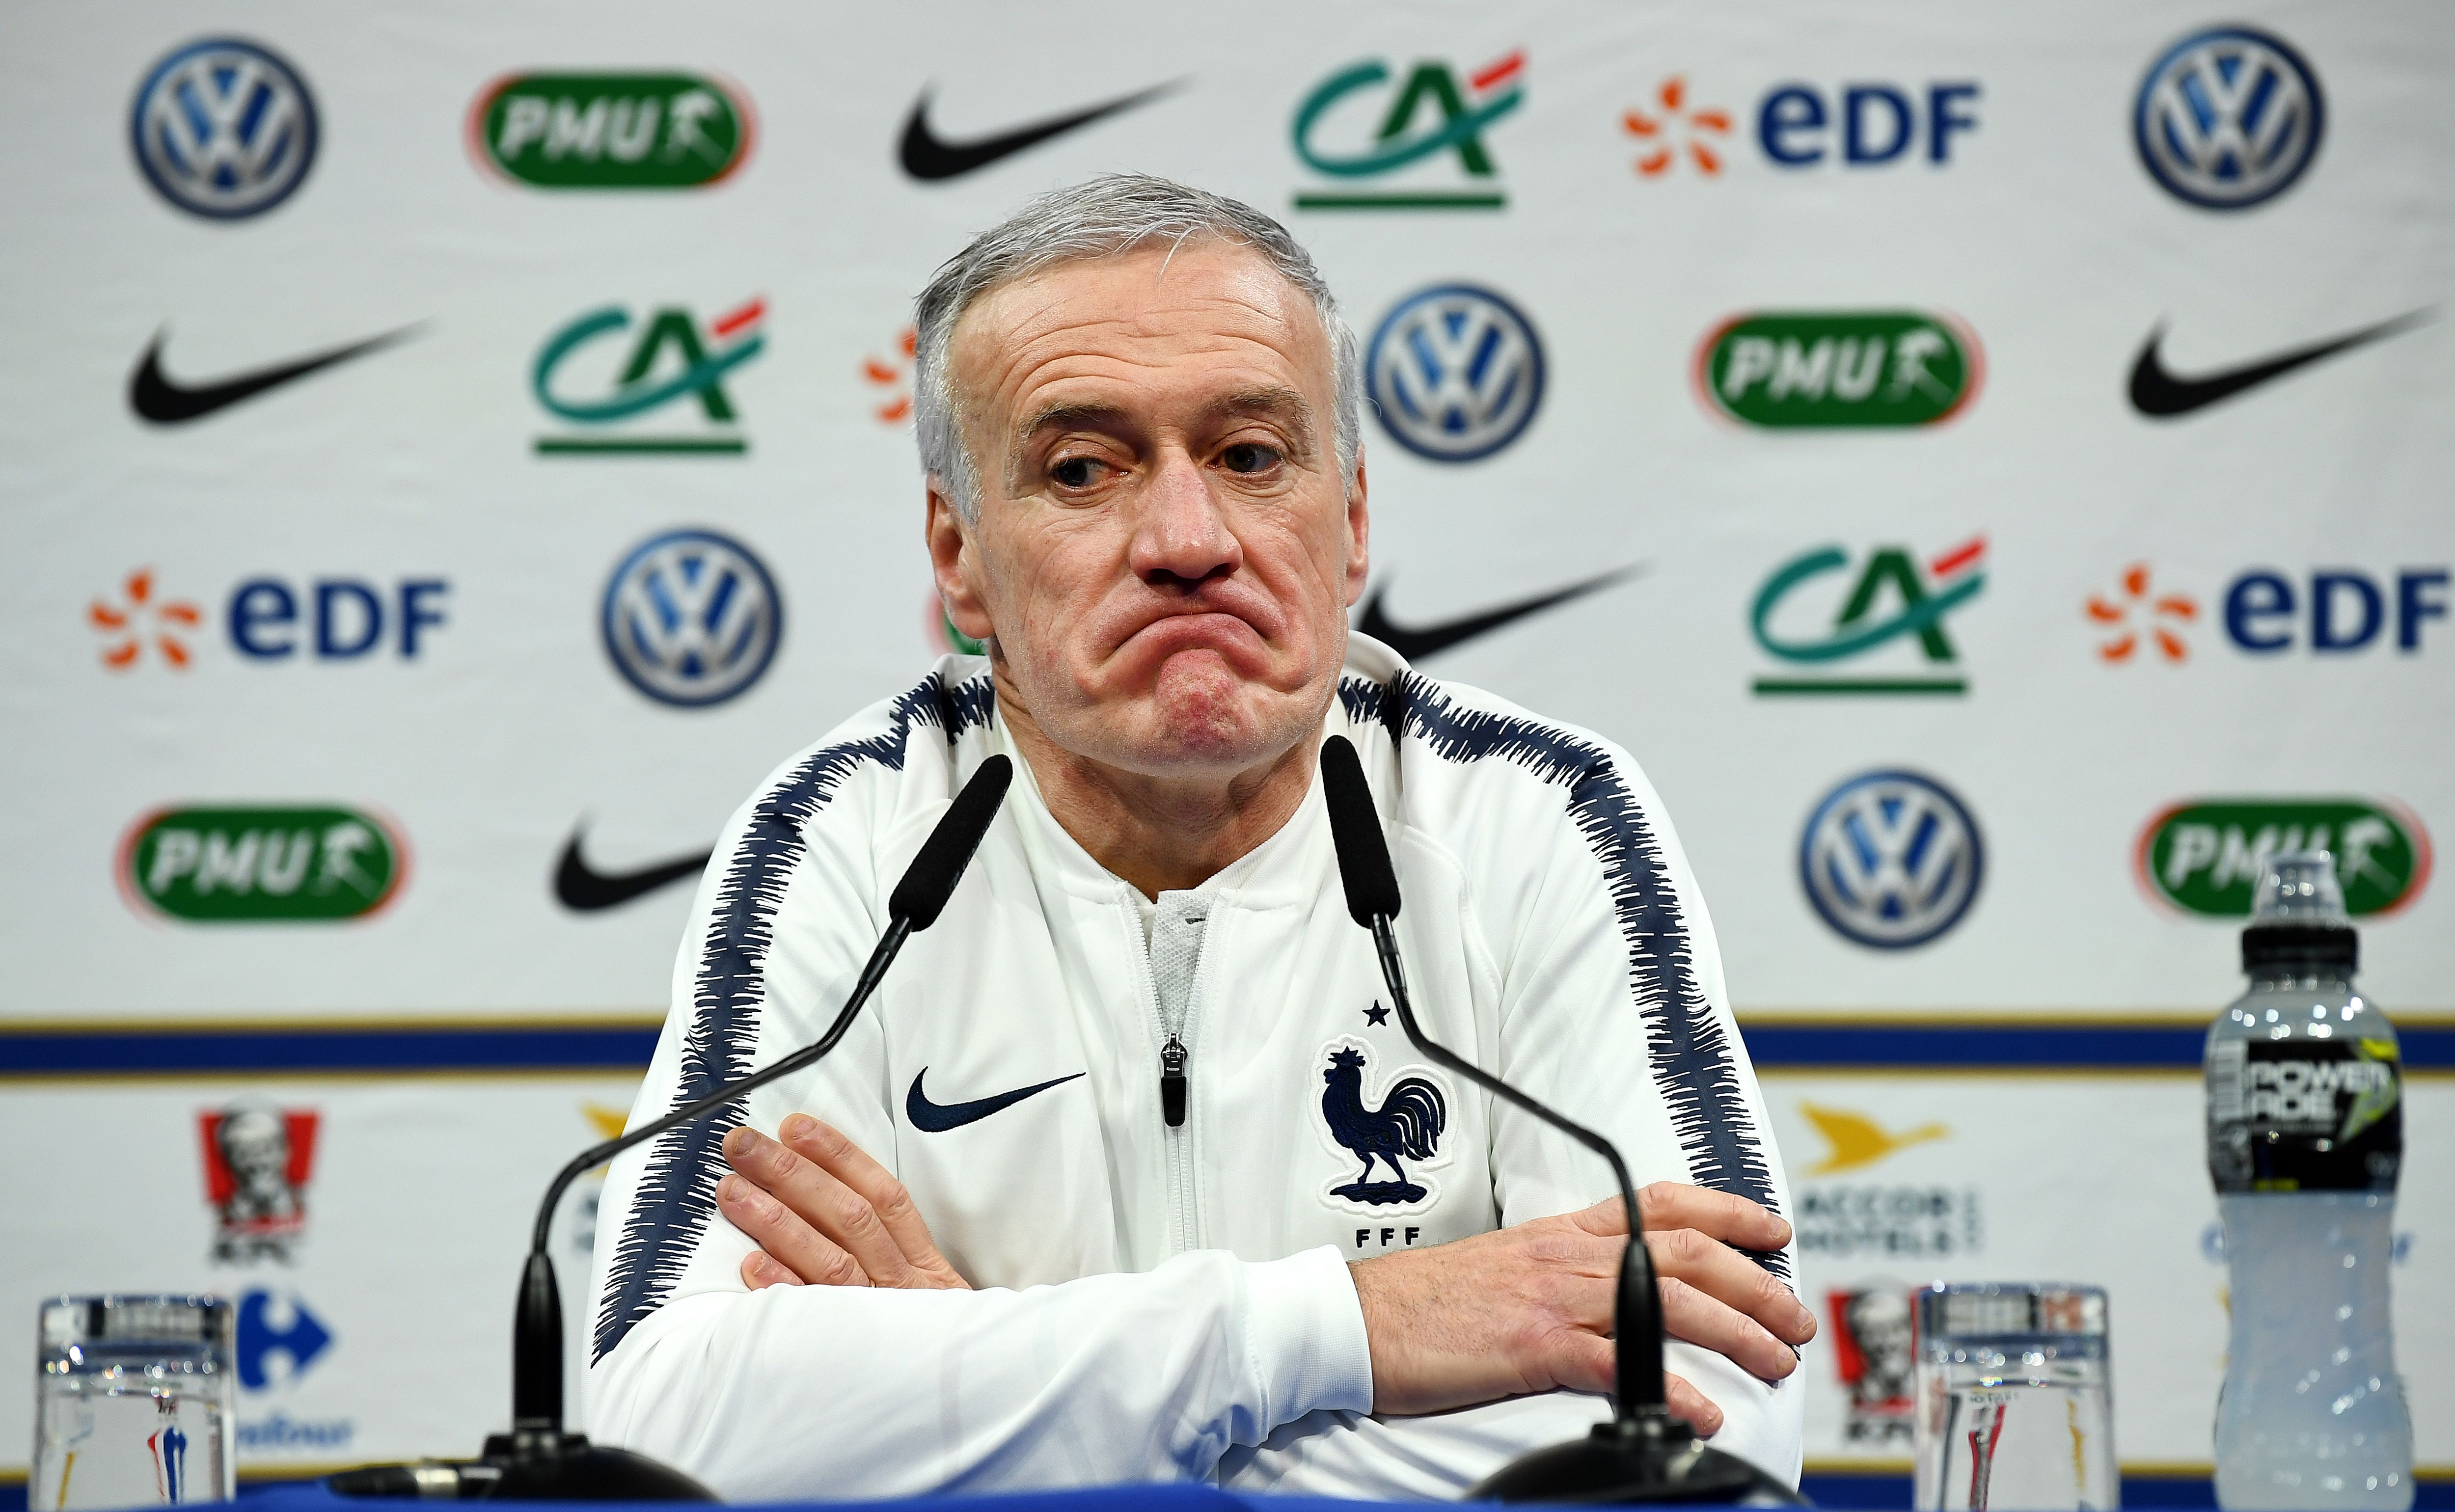 France's head coach Didier Deschamps grimaces during a press conference in Clairefontaine on March 19, 2018, as part of the team's preparation for the friendly football match against Colombia and Russia.  / AFP PHOTO / FRANCK FIFE        (Photo credit should read FRANCK FIFE/AFP/Getty Images)